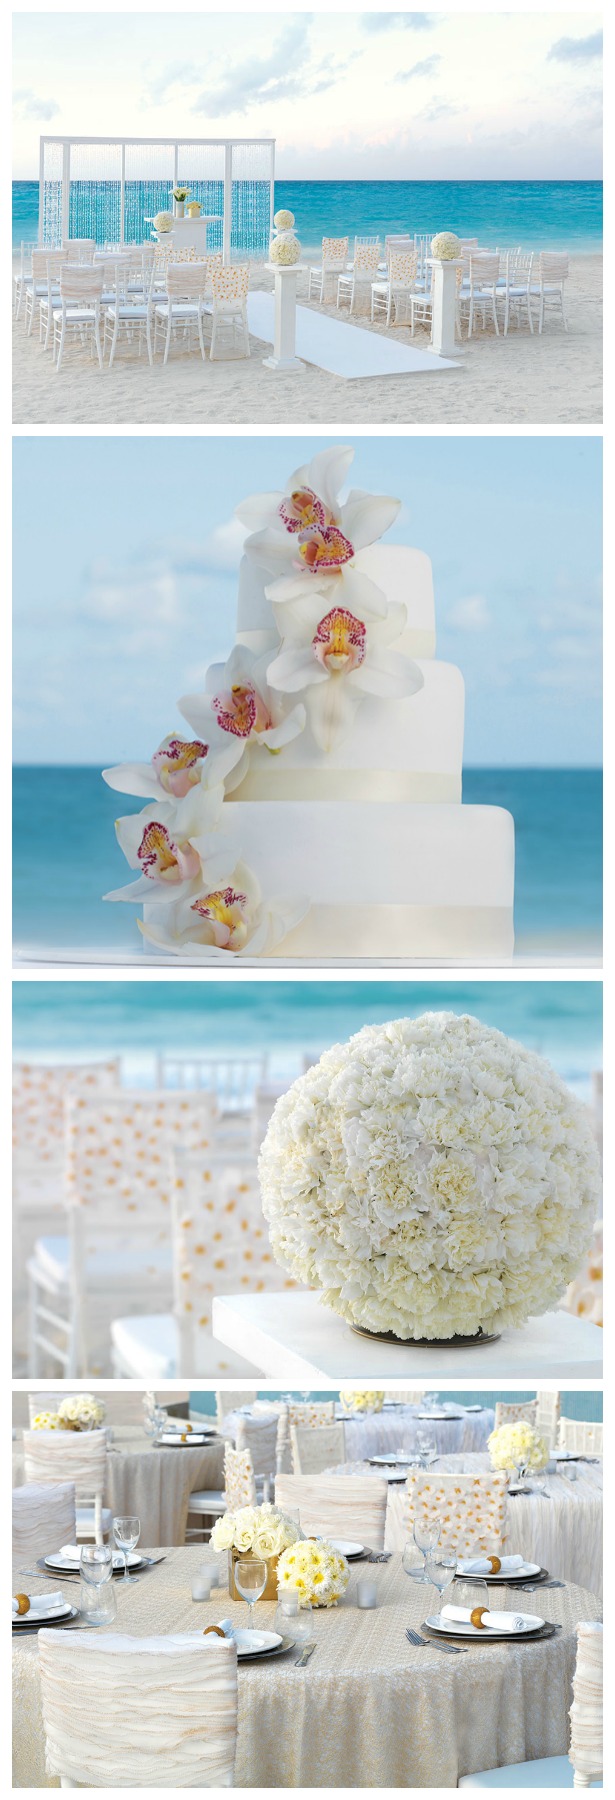 Apple Vacations and Hard Rock Hotels Wedding by Collin Cowie